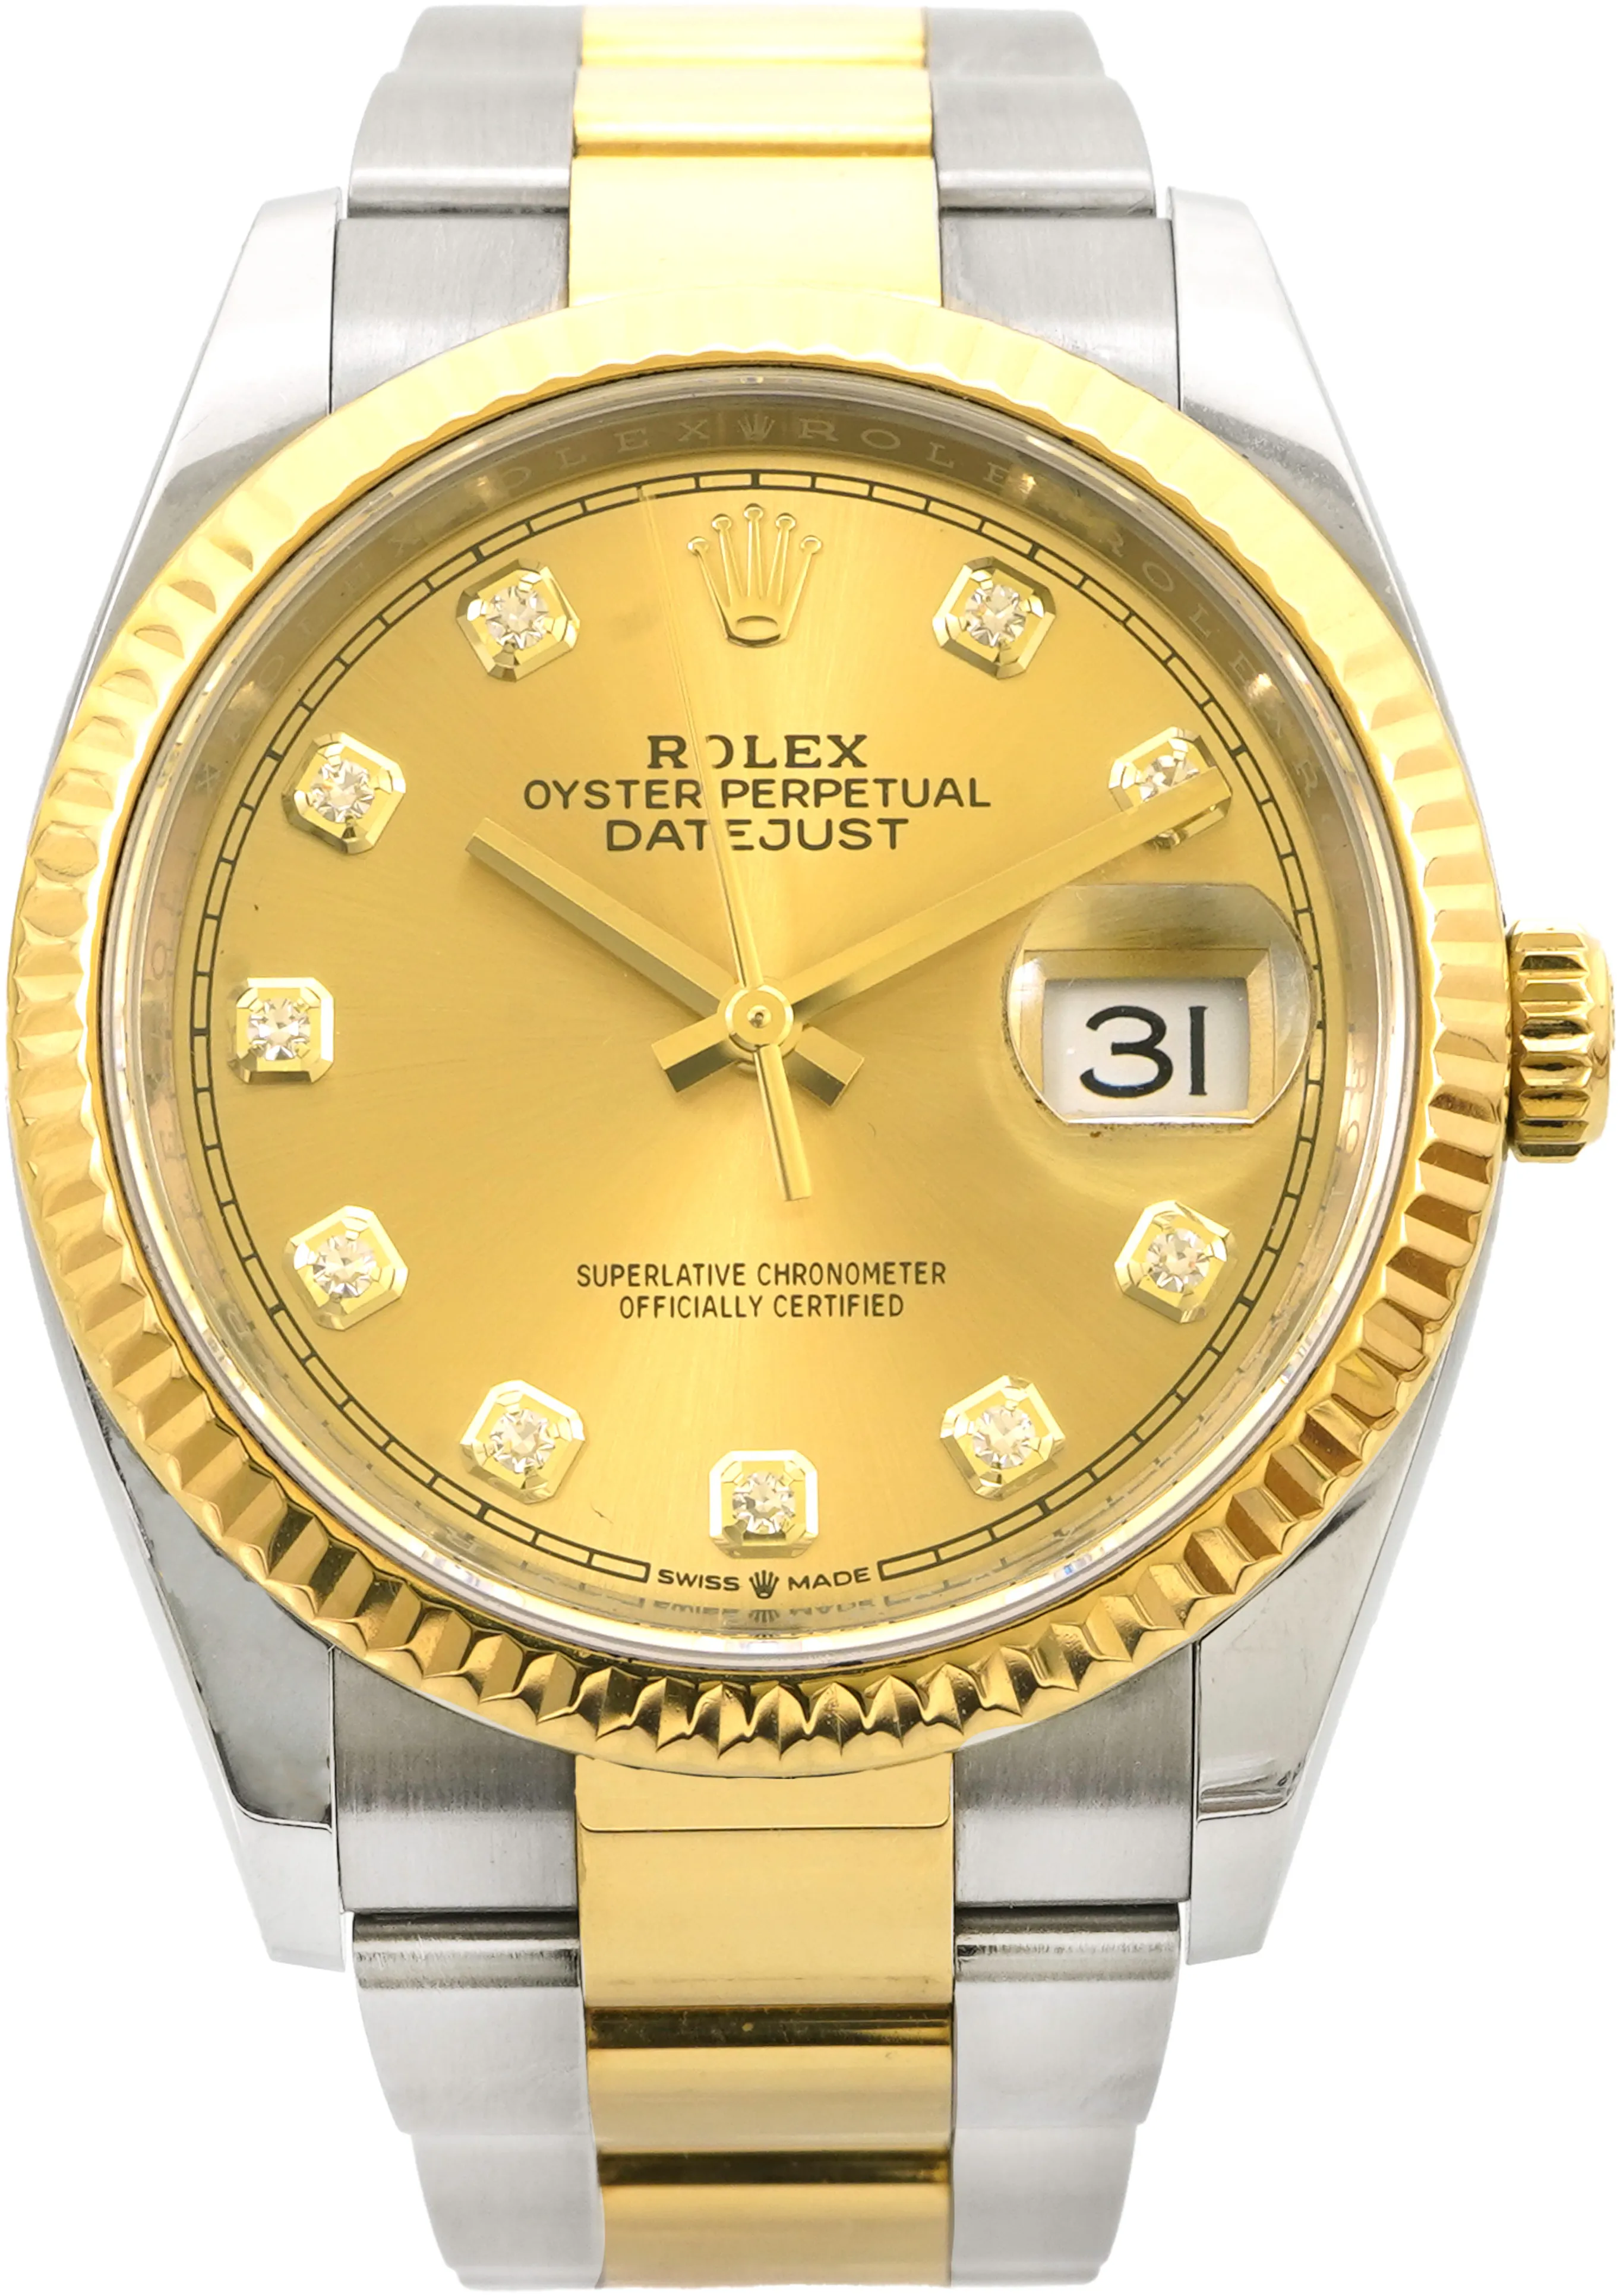 Rolex Datejust 36 126233 36mm Yellow gold and stainless steel